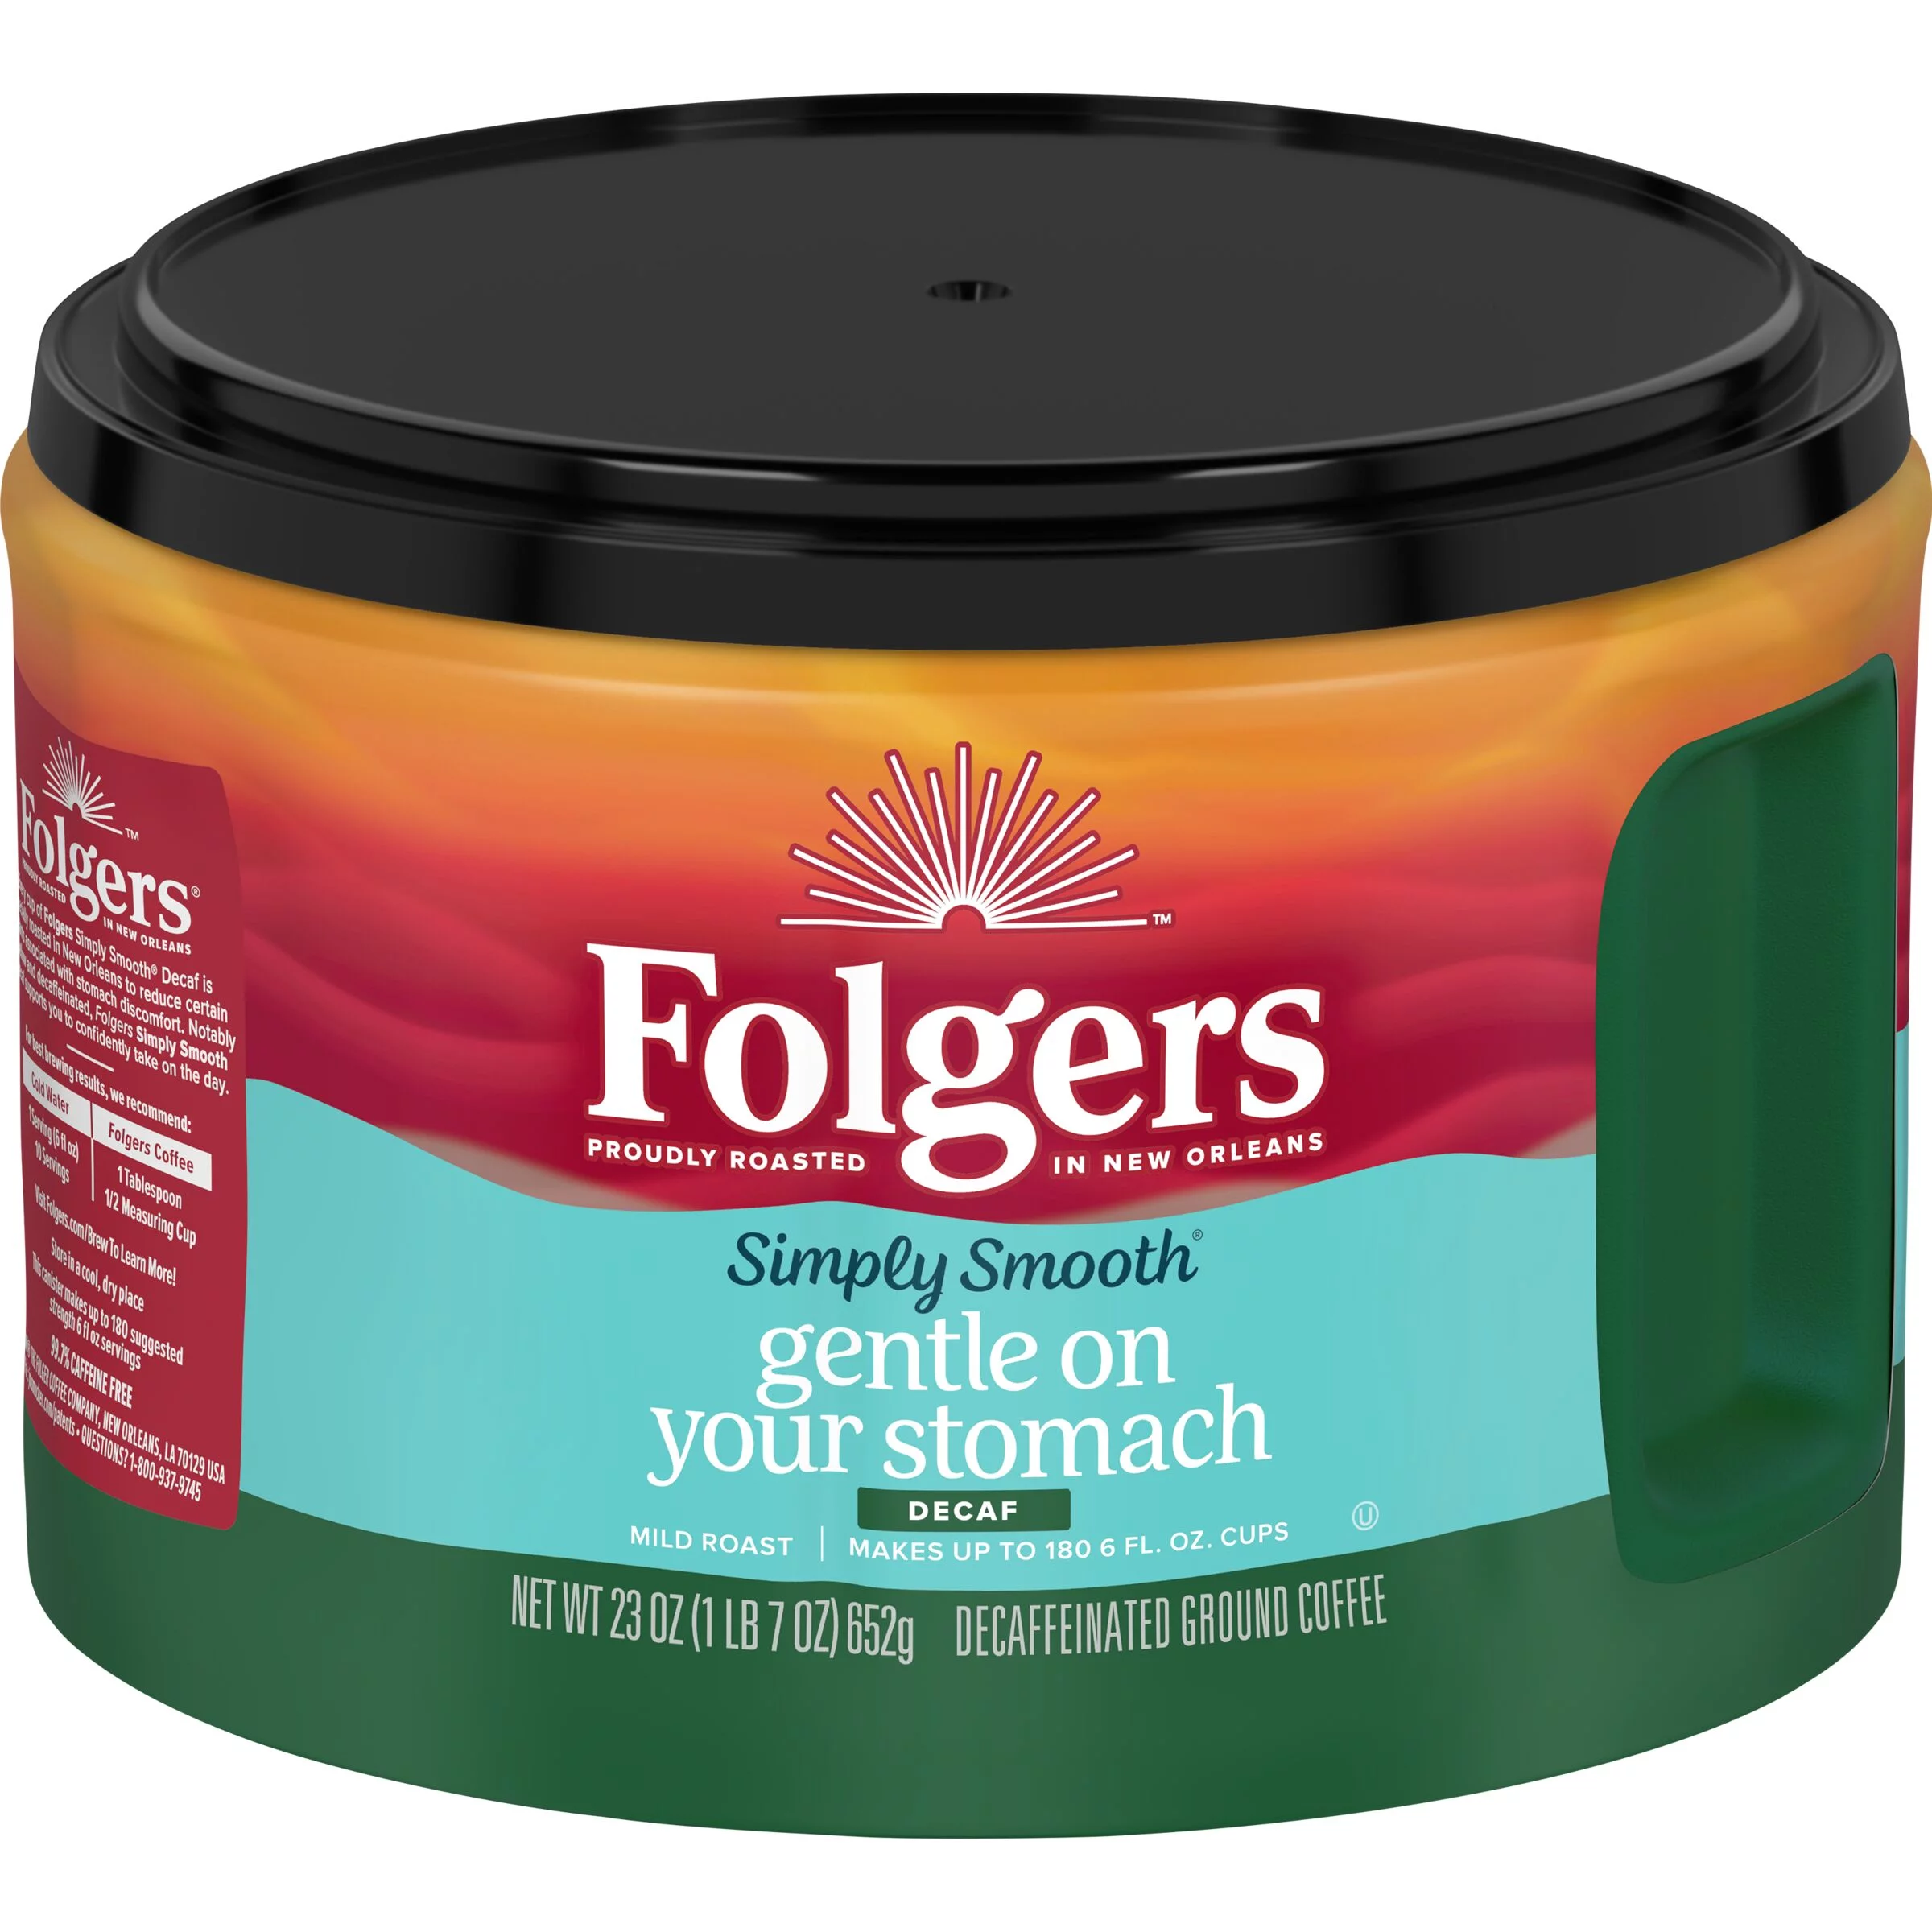 Folgers Simply Smooth Decaf Ground Coffee, 23 Oz. Canister